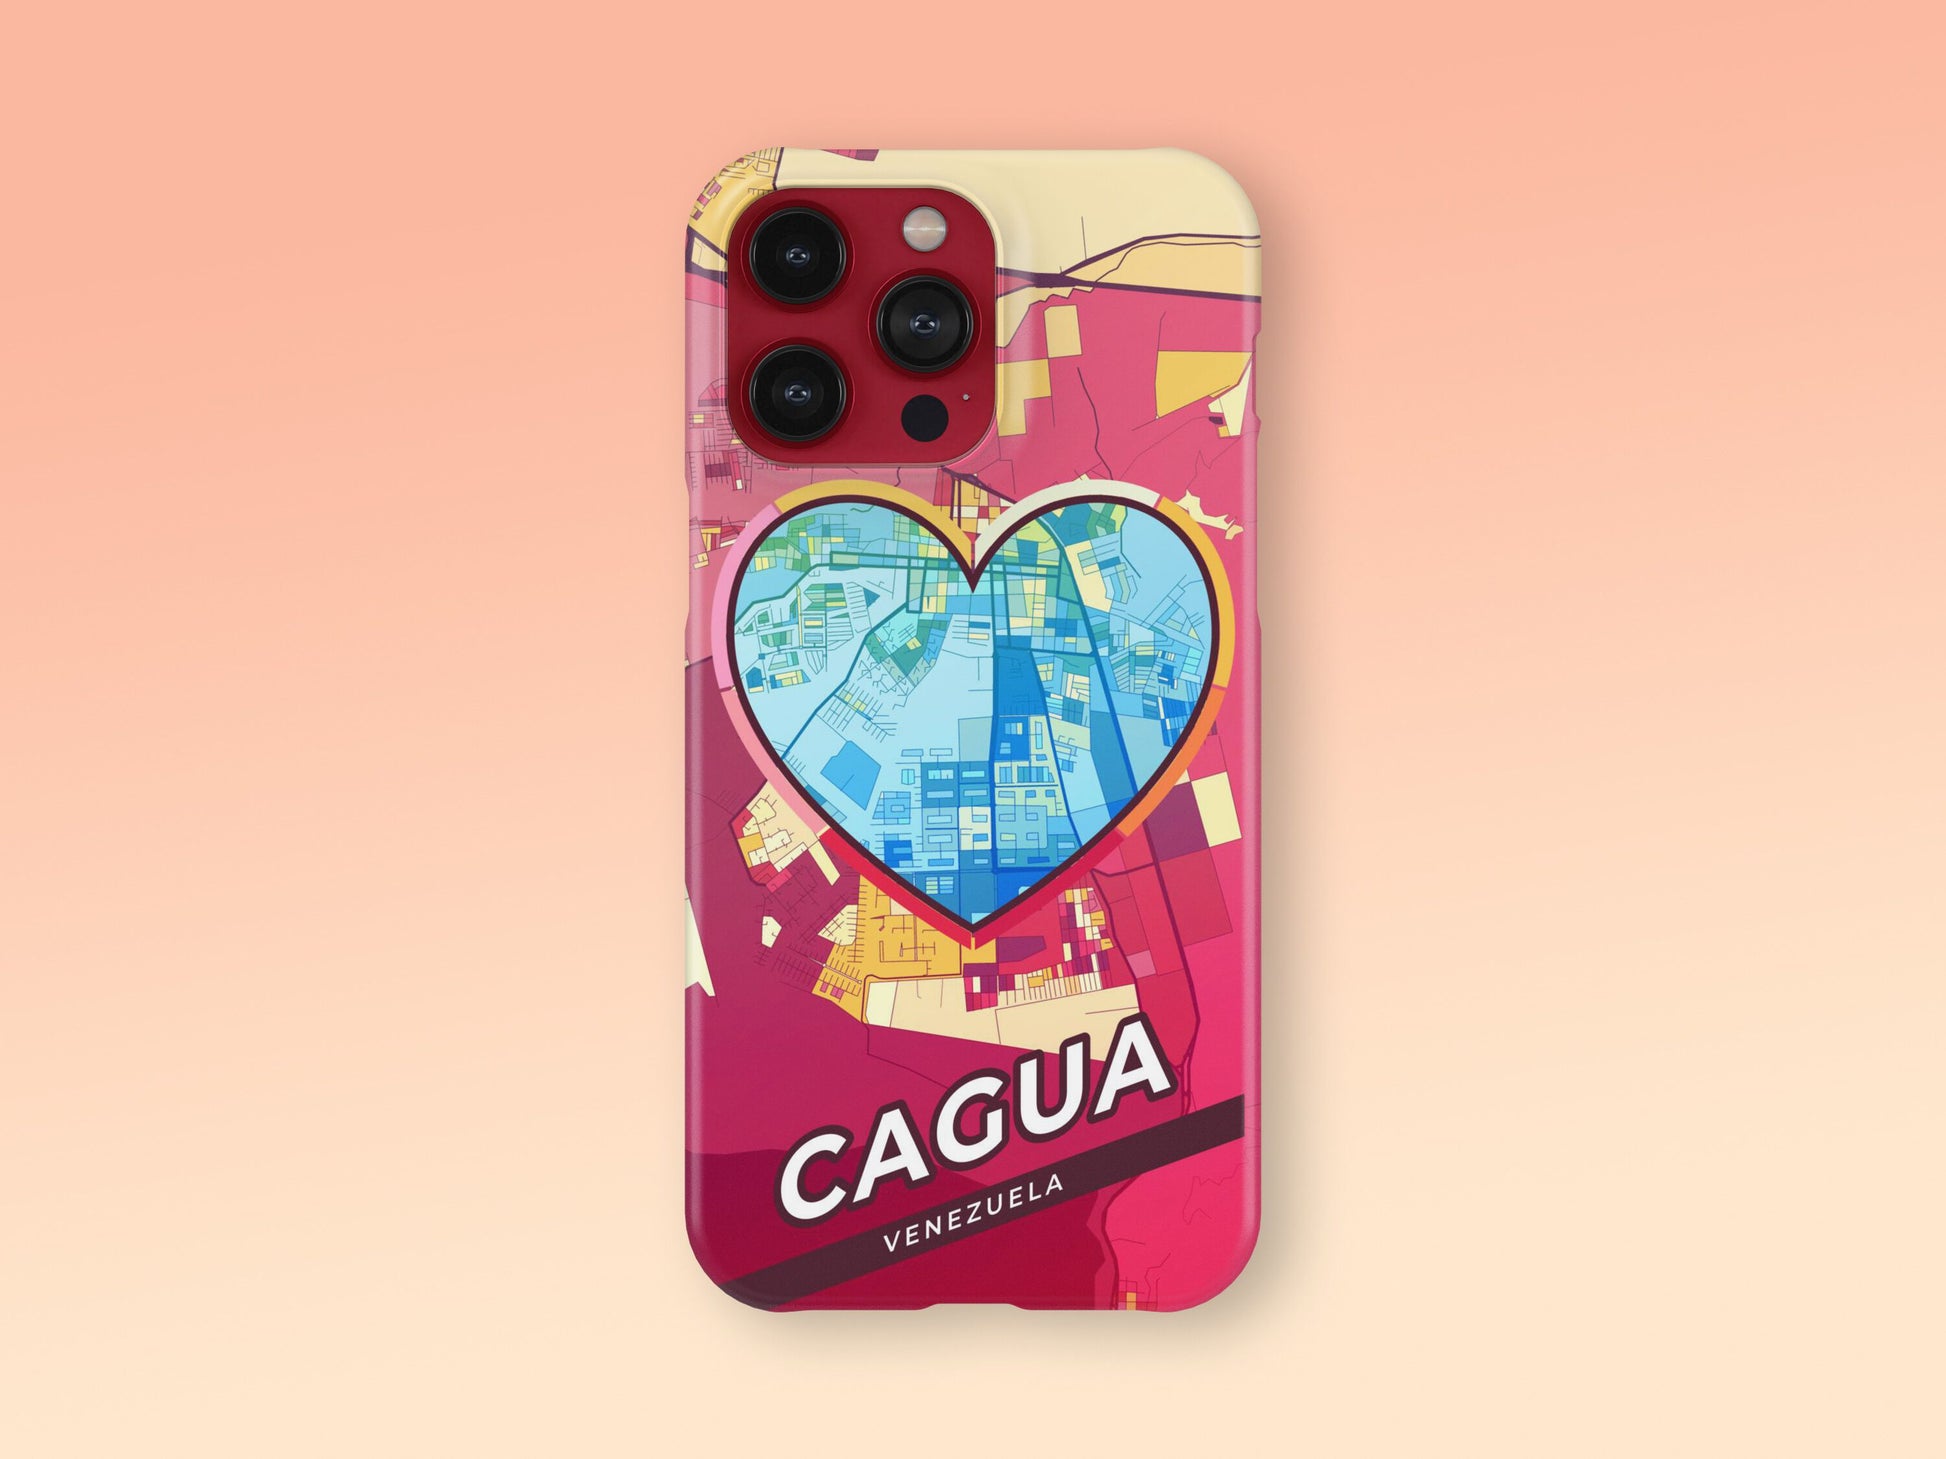 Cagua Venezuela slim phone case with colorful icon. Birthday, wedding or housewarming gift. Couple match cases. 2